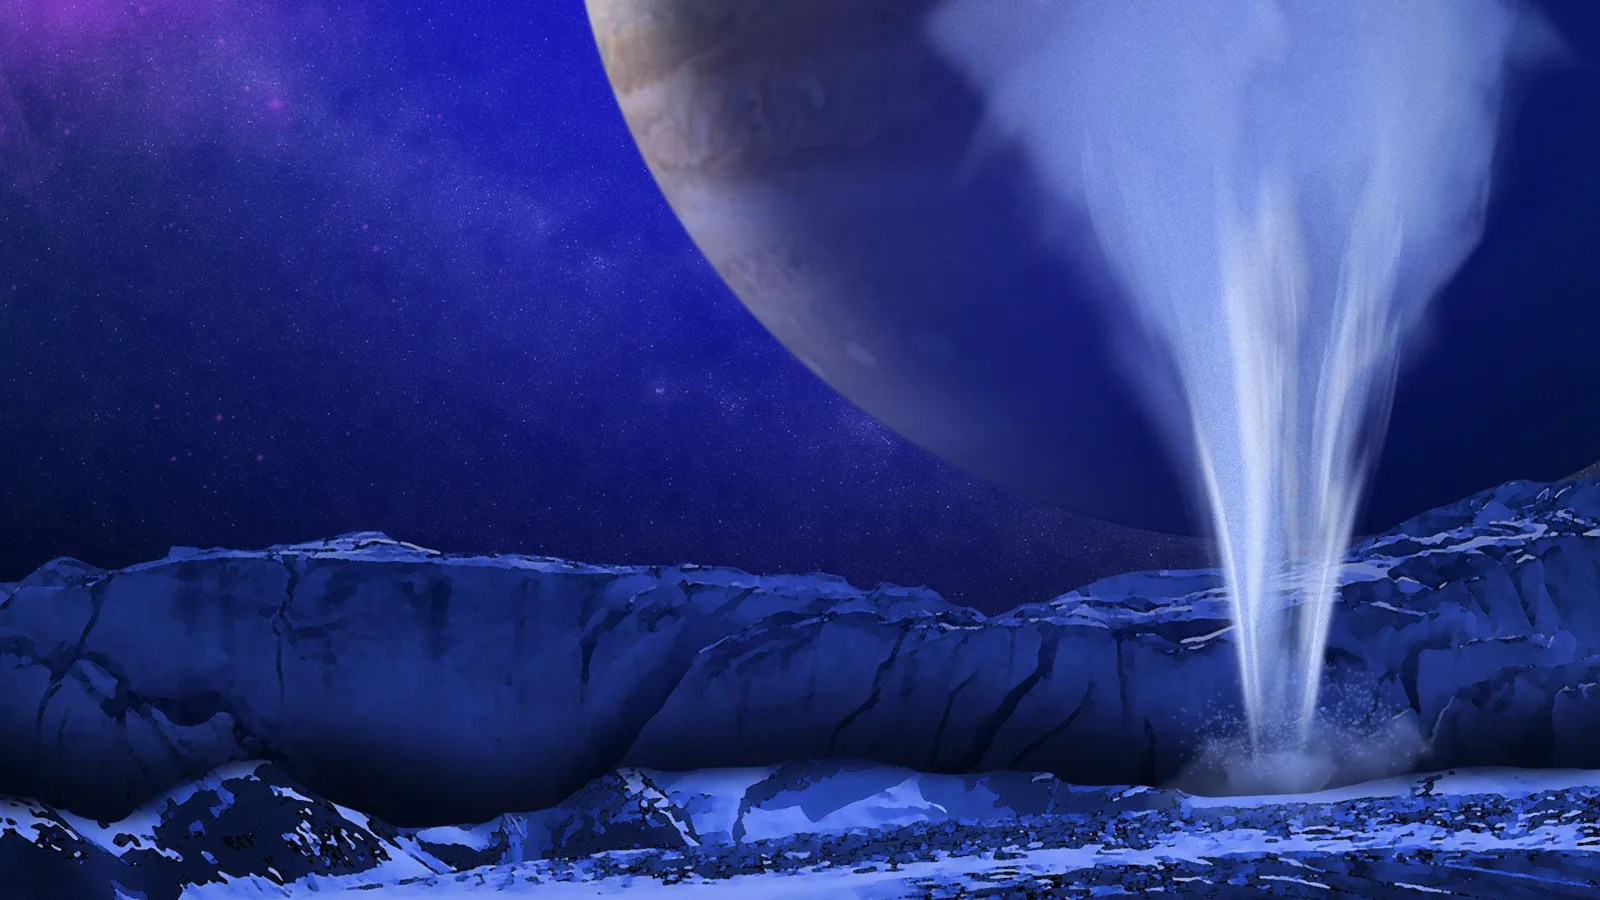 An illustration of a geyser erupting on an icy surface. The planet Jupiter looms in the background.